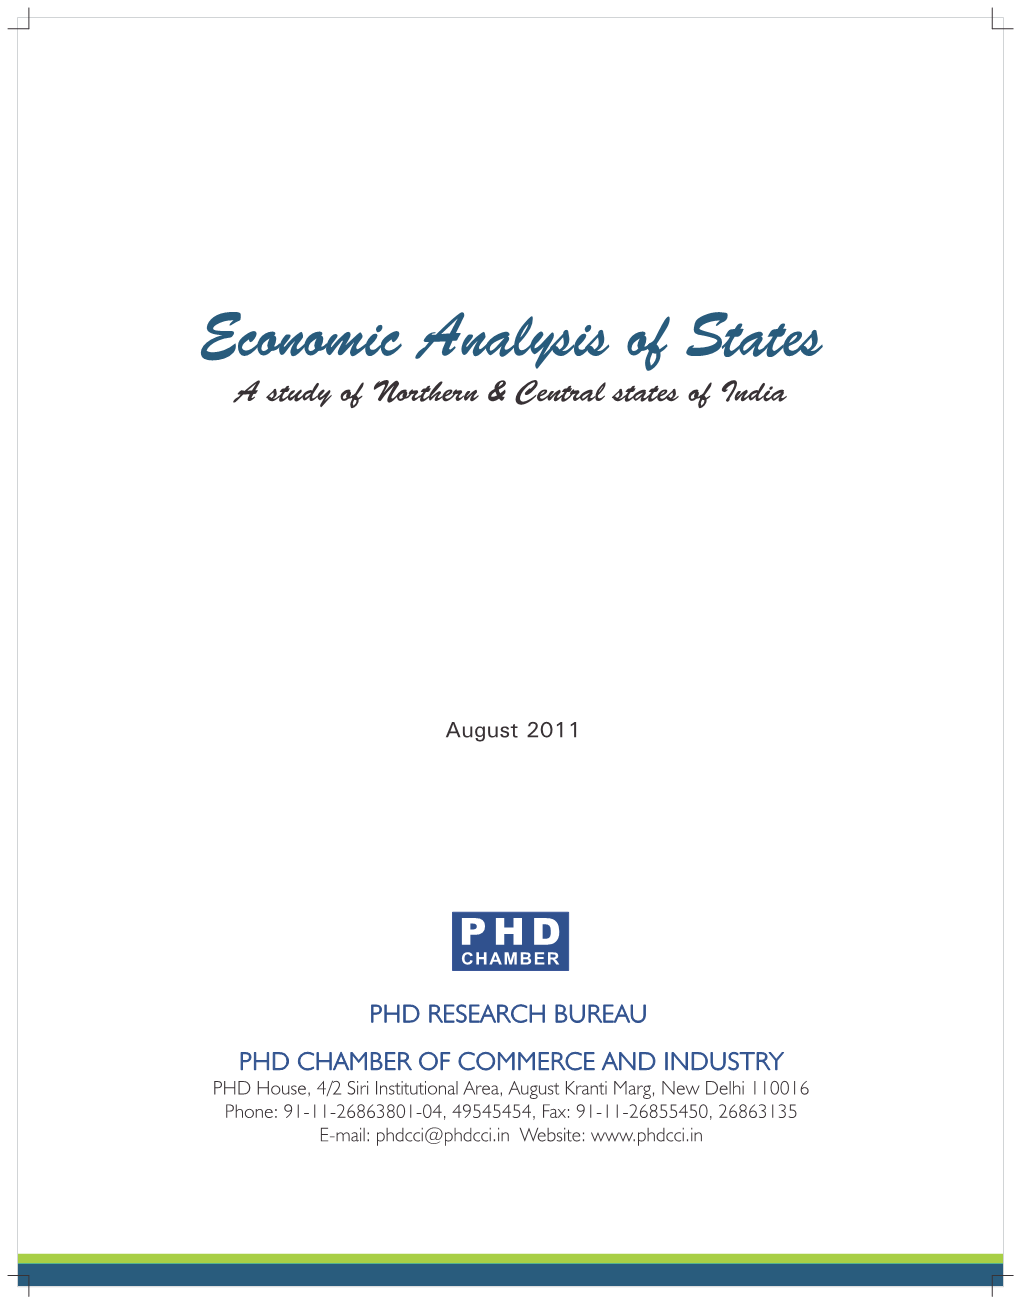 Economic Analysis of States a Study of Northern & Central States of India